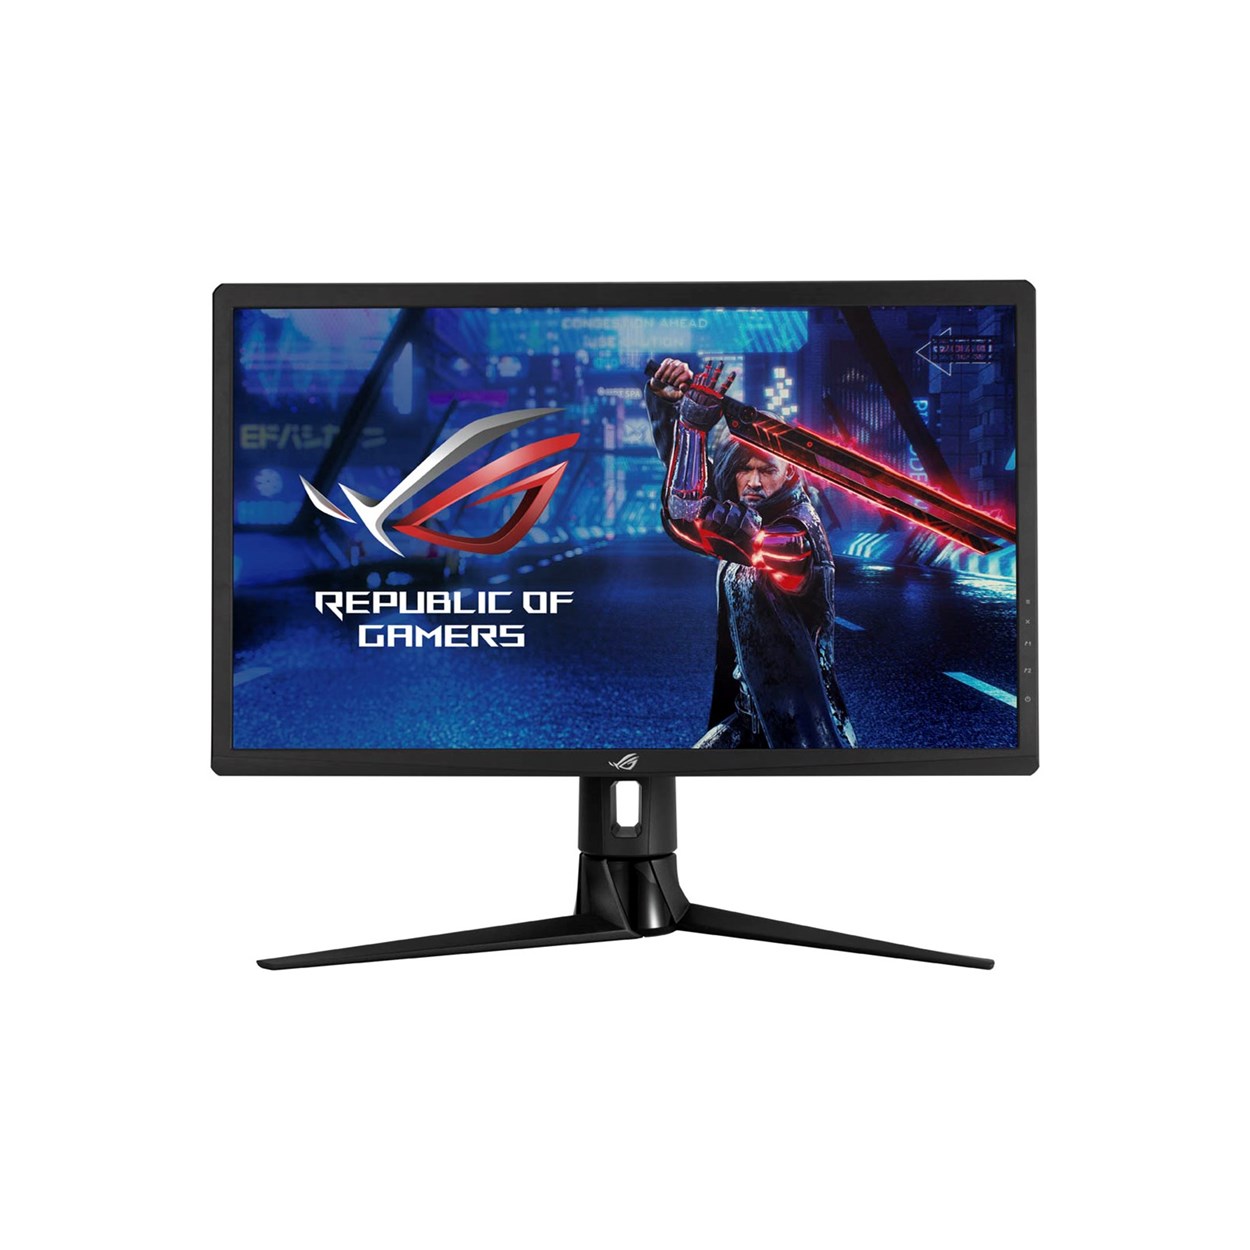 ASUS ROG Strix XG27UQR Monitor, viewed from the front.